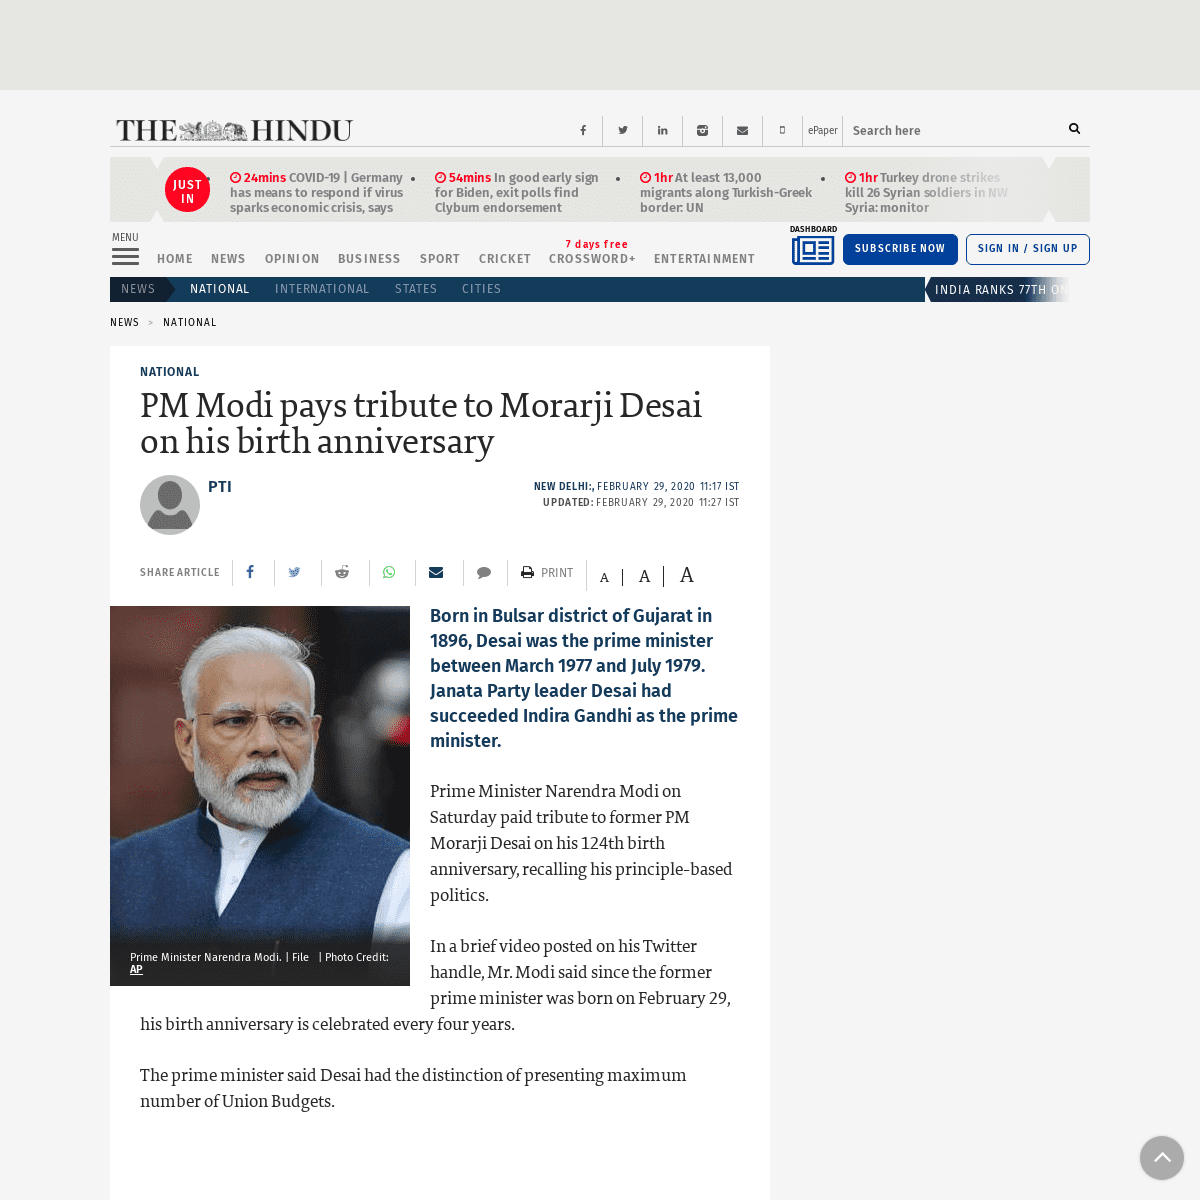 A complete backup of www.thehindu.com/news/national/pm-modi-pays-tribute-to-morarji-desai-on-his-birth-anniversary/article309489